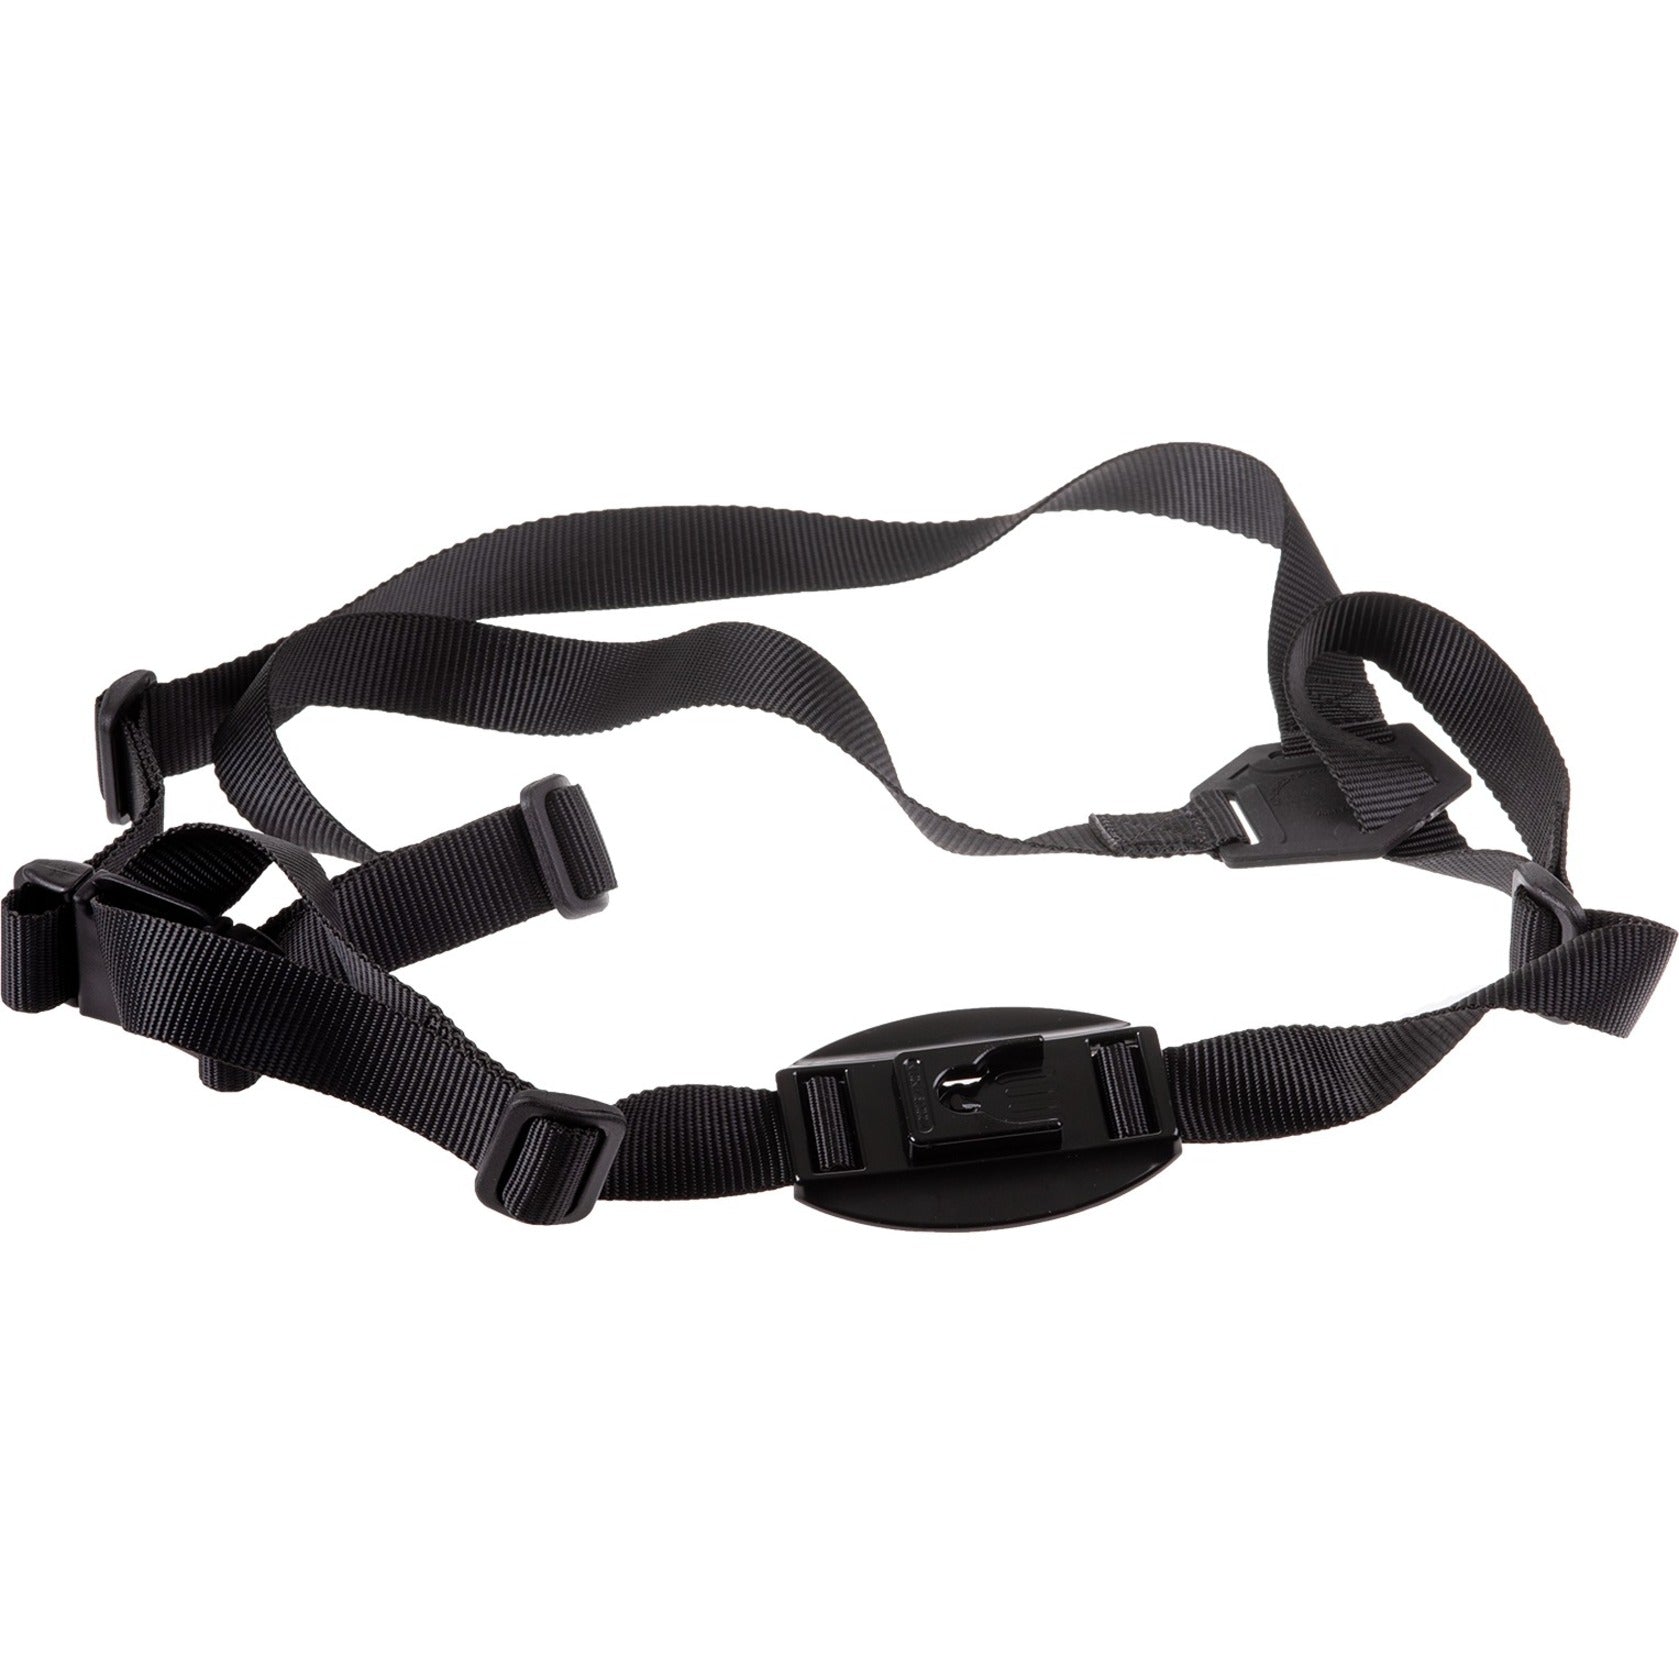 AXIS 02129-001 TW1103 Chest Harness Mount 5 パック - TAA 準拠 アクシス - AXIS TW1103 チェストハーネスマウント